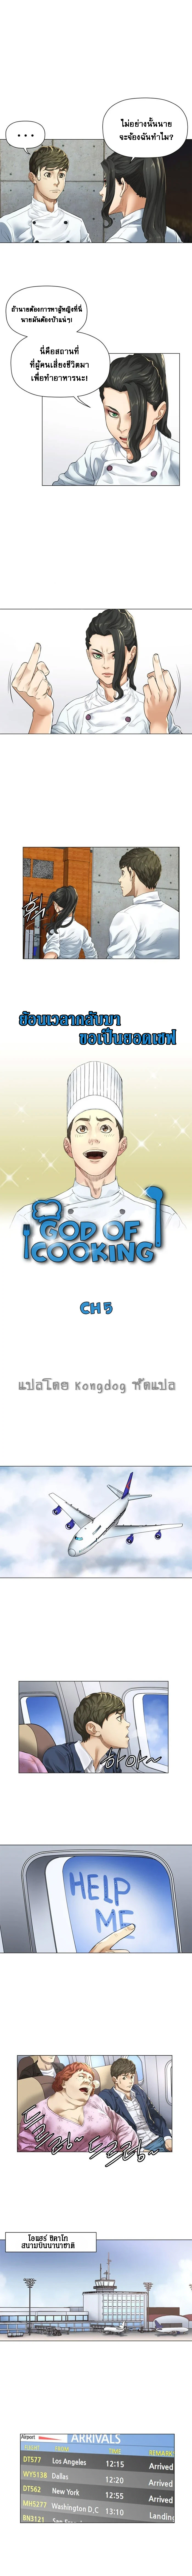 God of Cooking 5 (2)